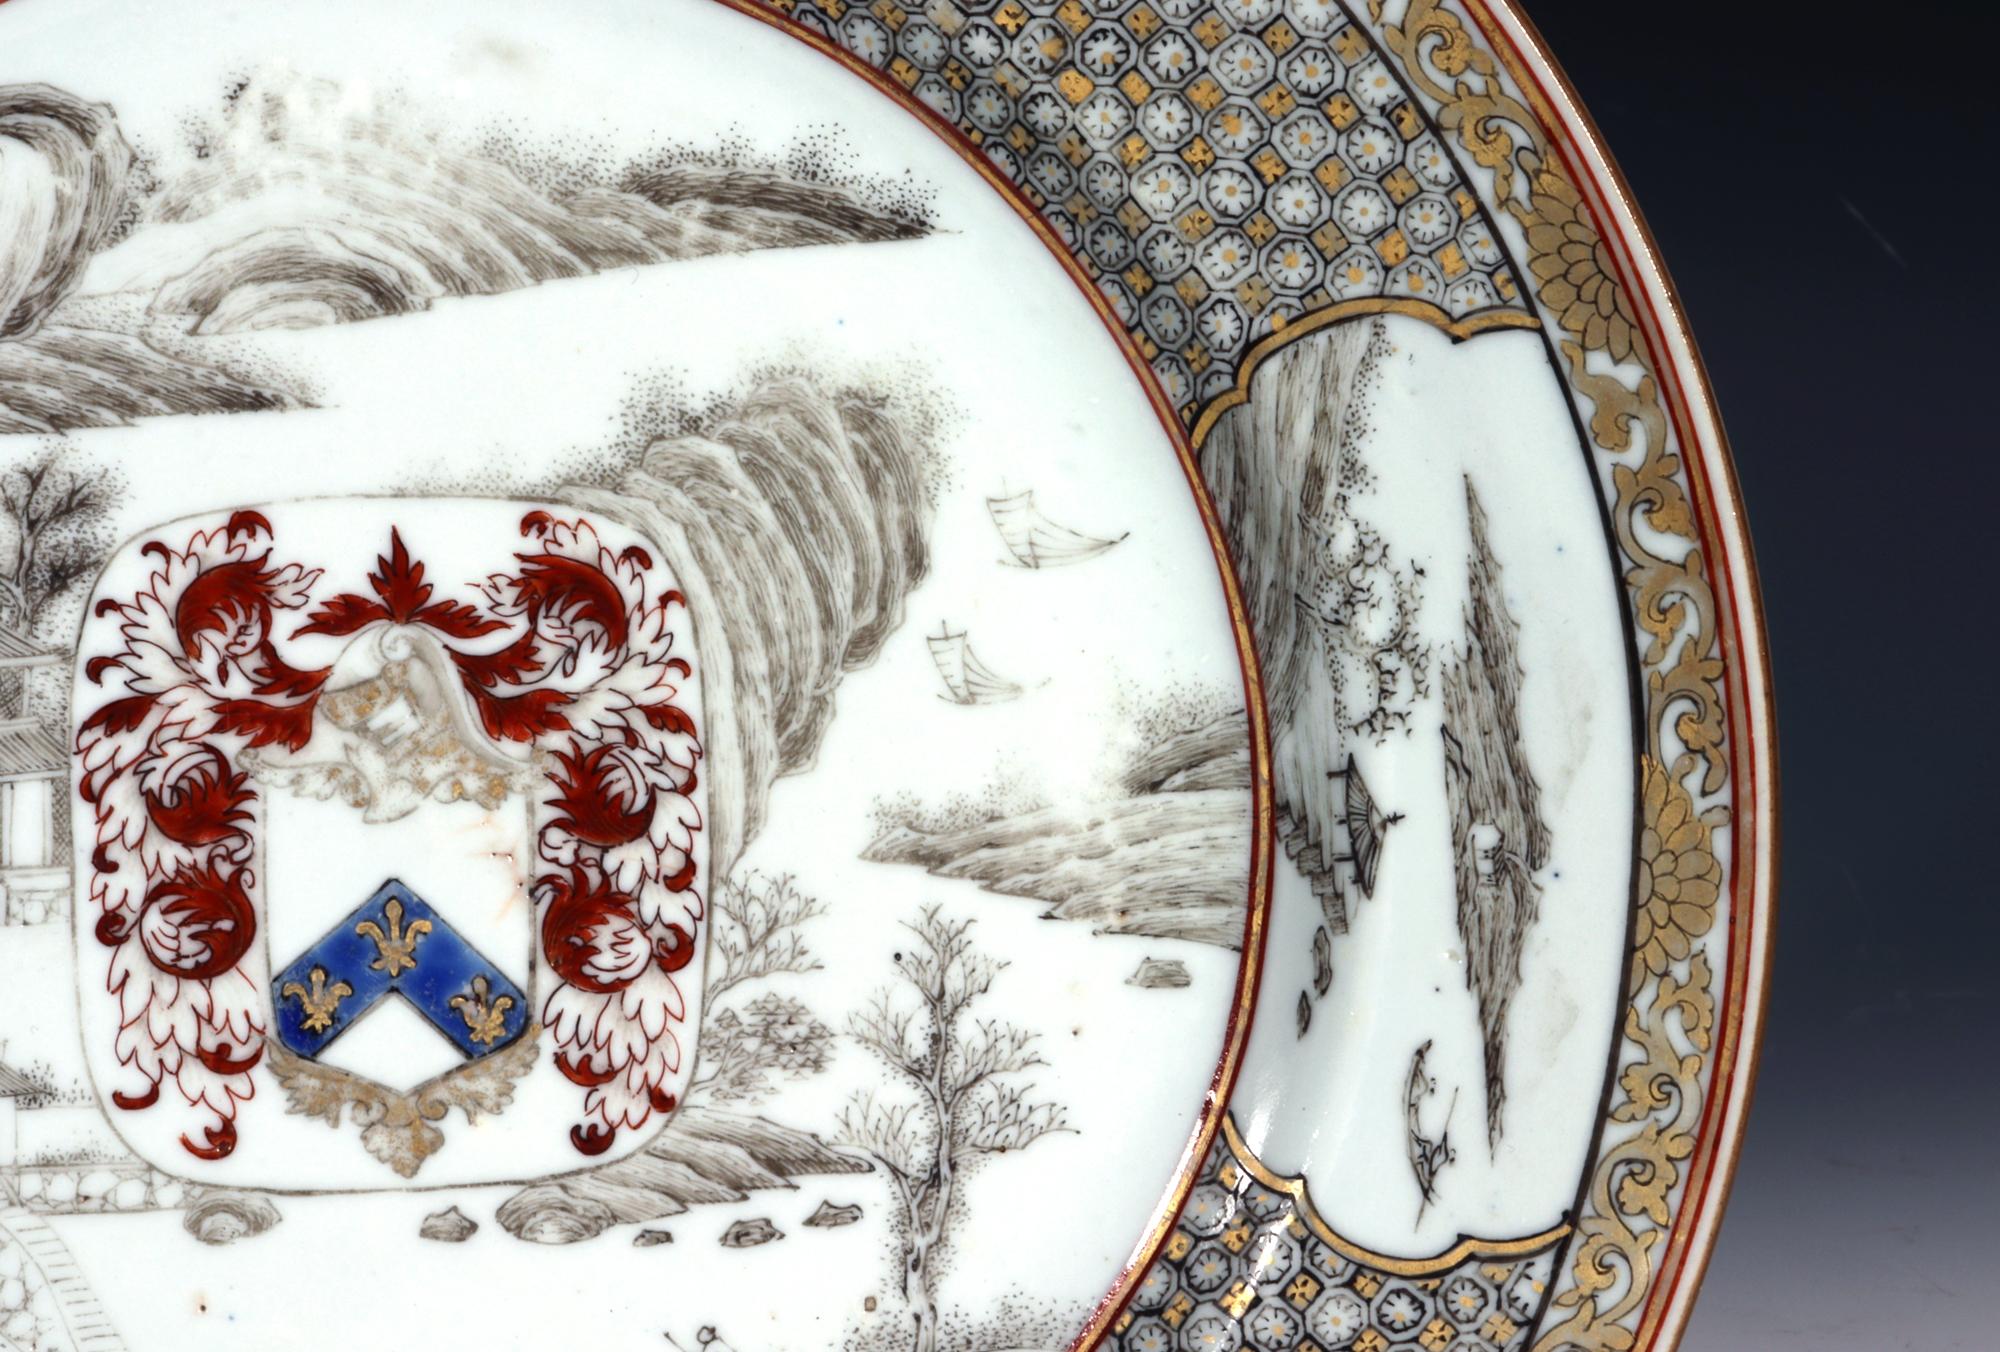 Yongzheng Chinese Export Porcelain Plate with Arms of Elwick of Middlesex For Sale 4